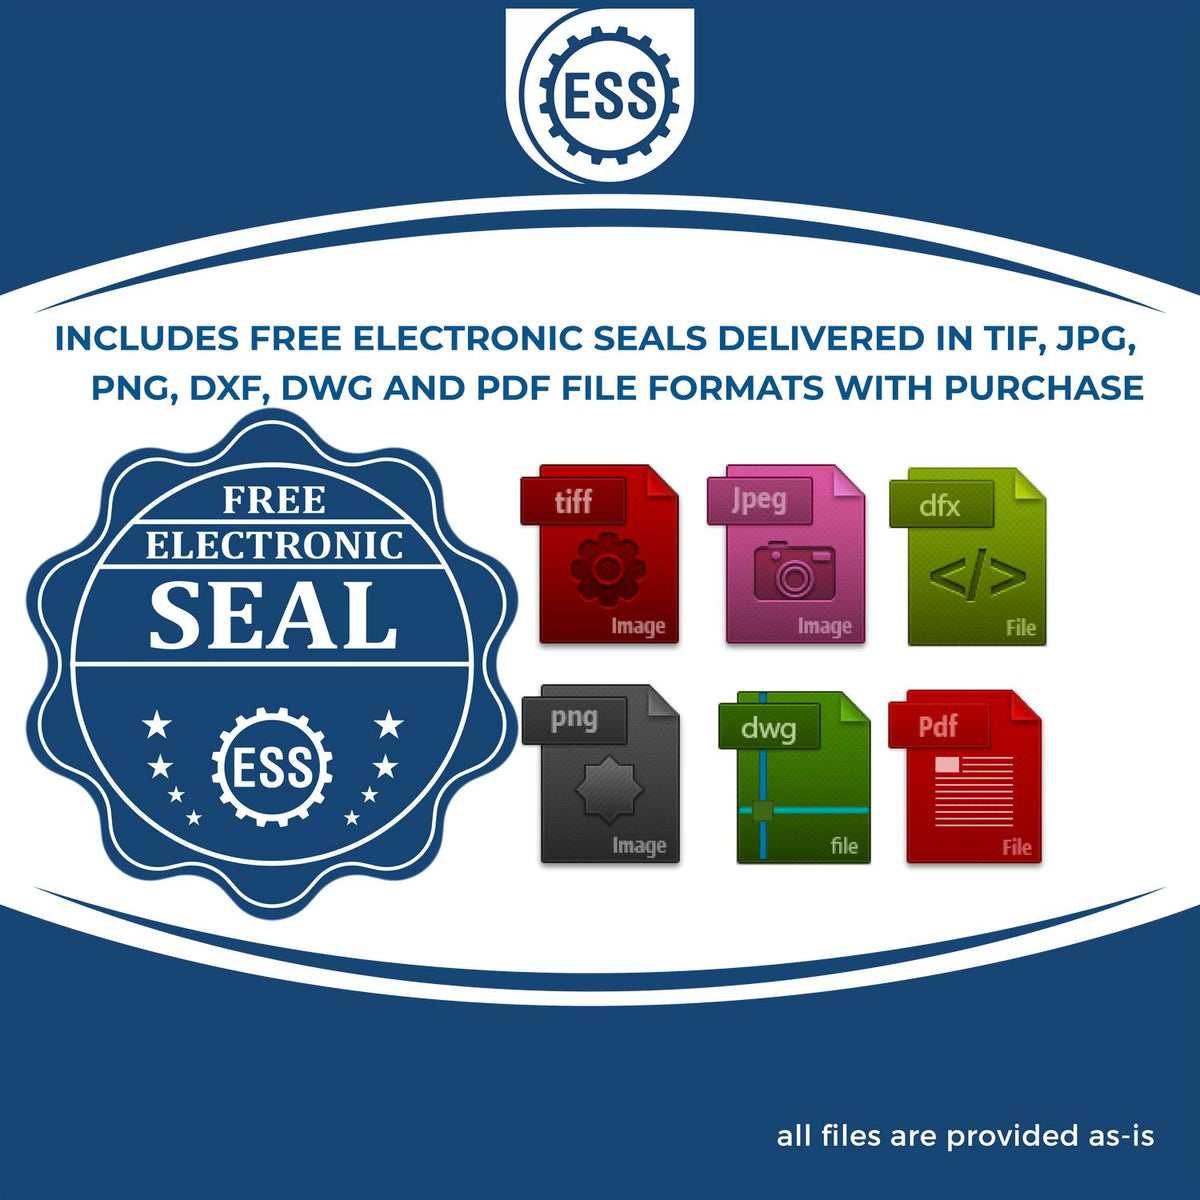 An infographic for the free electronic seal for the Virginia Engineer Desk Seal illustrating the different file type icons such as DXF, DWG, TIF, JPG and PNG.